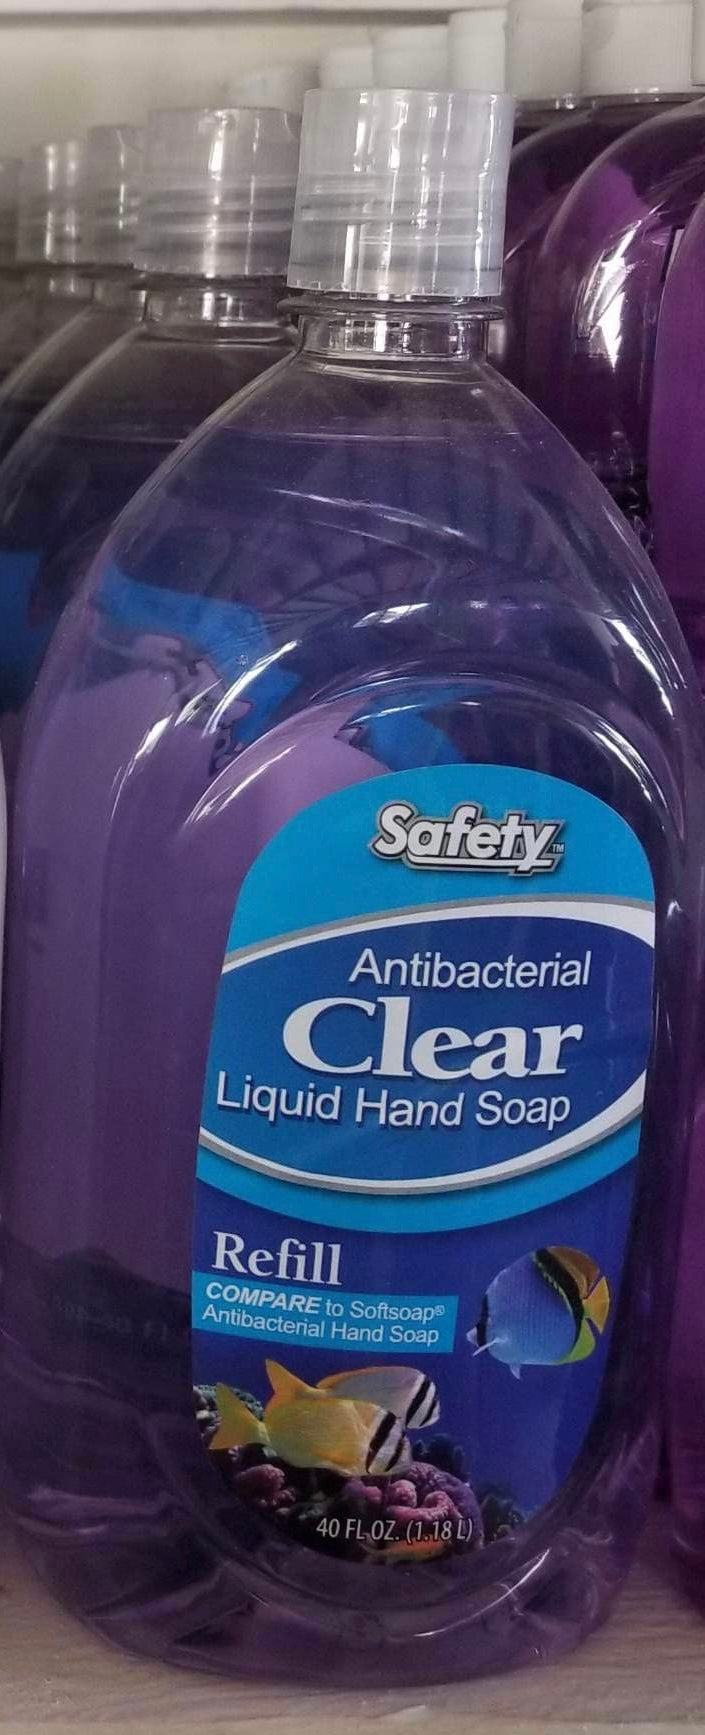 Safety Hand Soap-antibacterial CLEAR